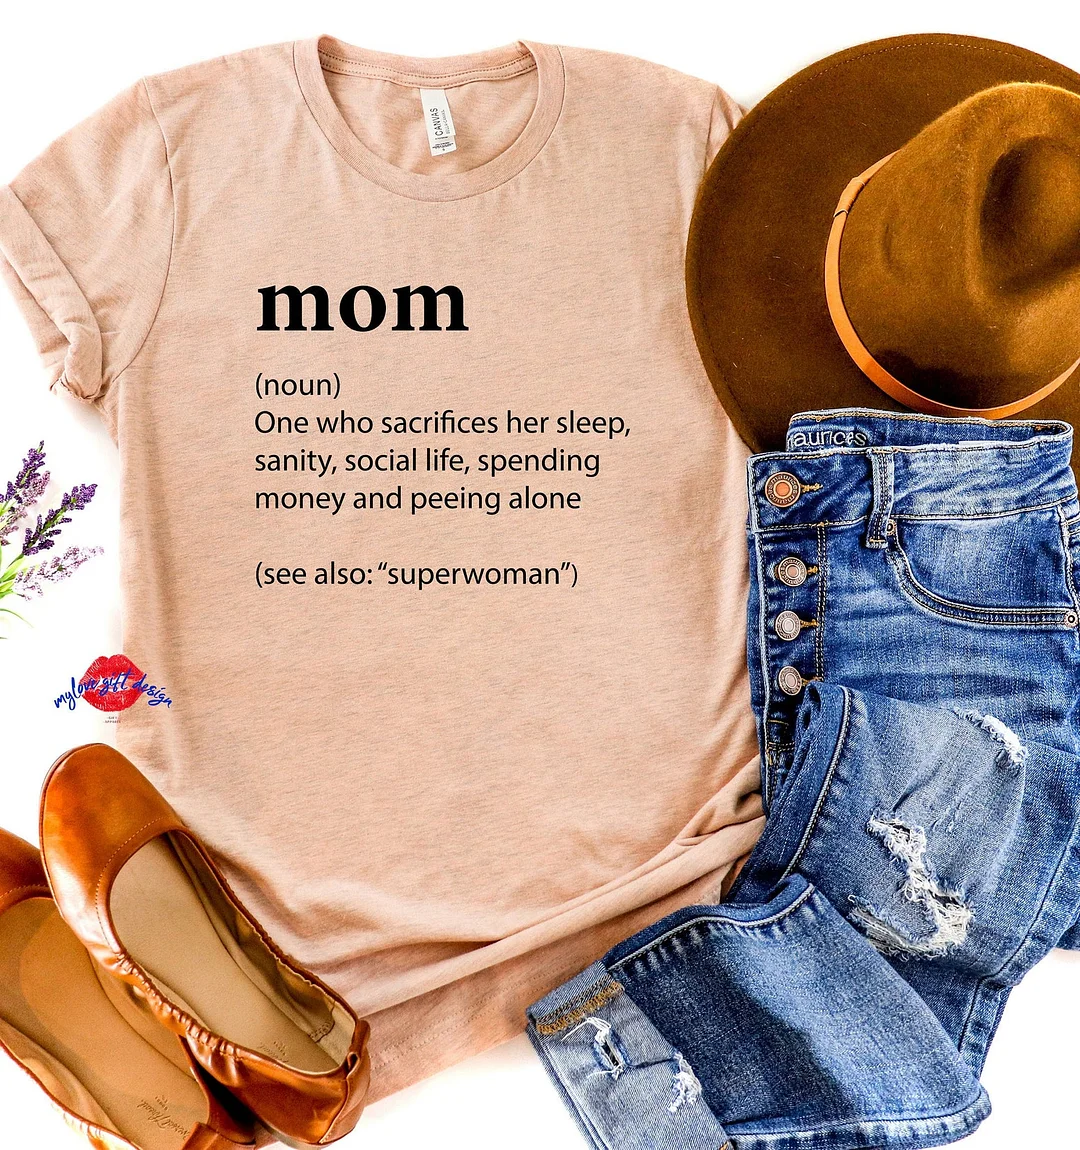 Mom Definition Tshirt Mother Meaning Shirt Tee Gift Family Mothers Day For Mother'S Top